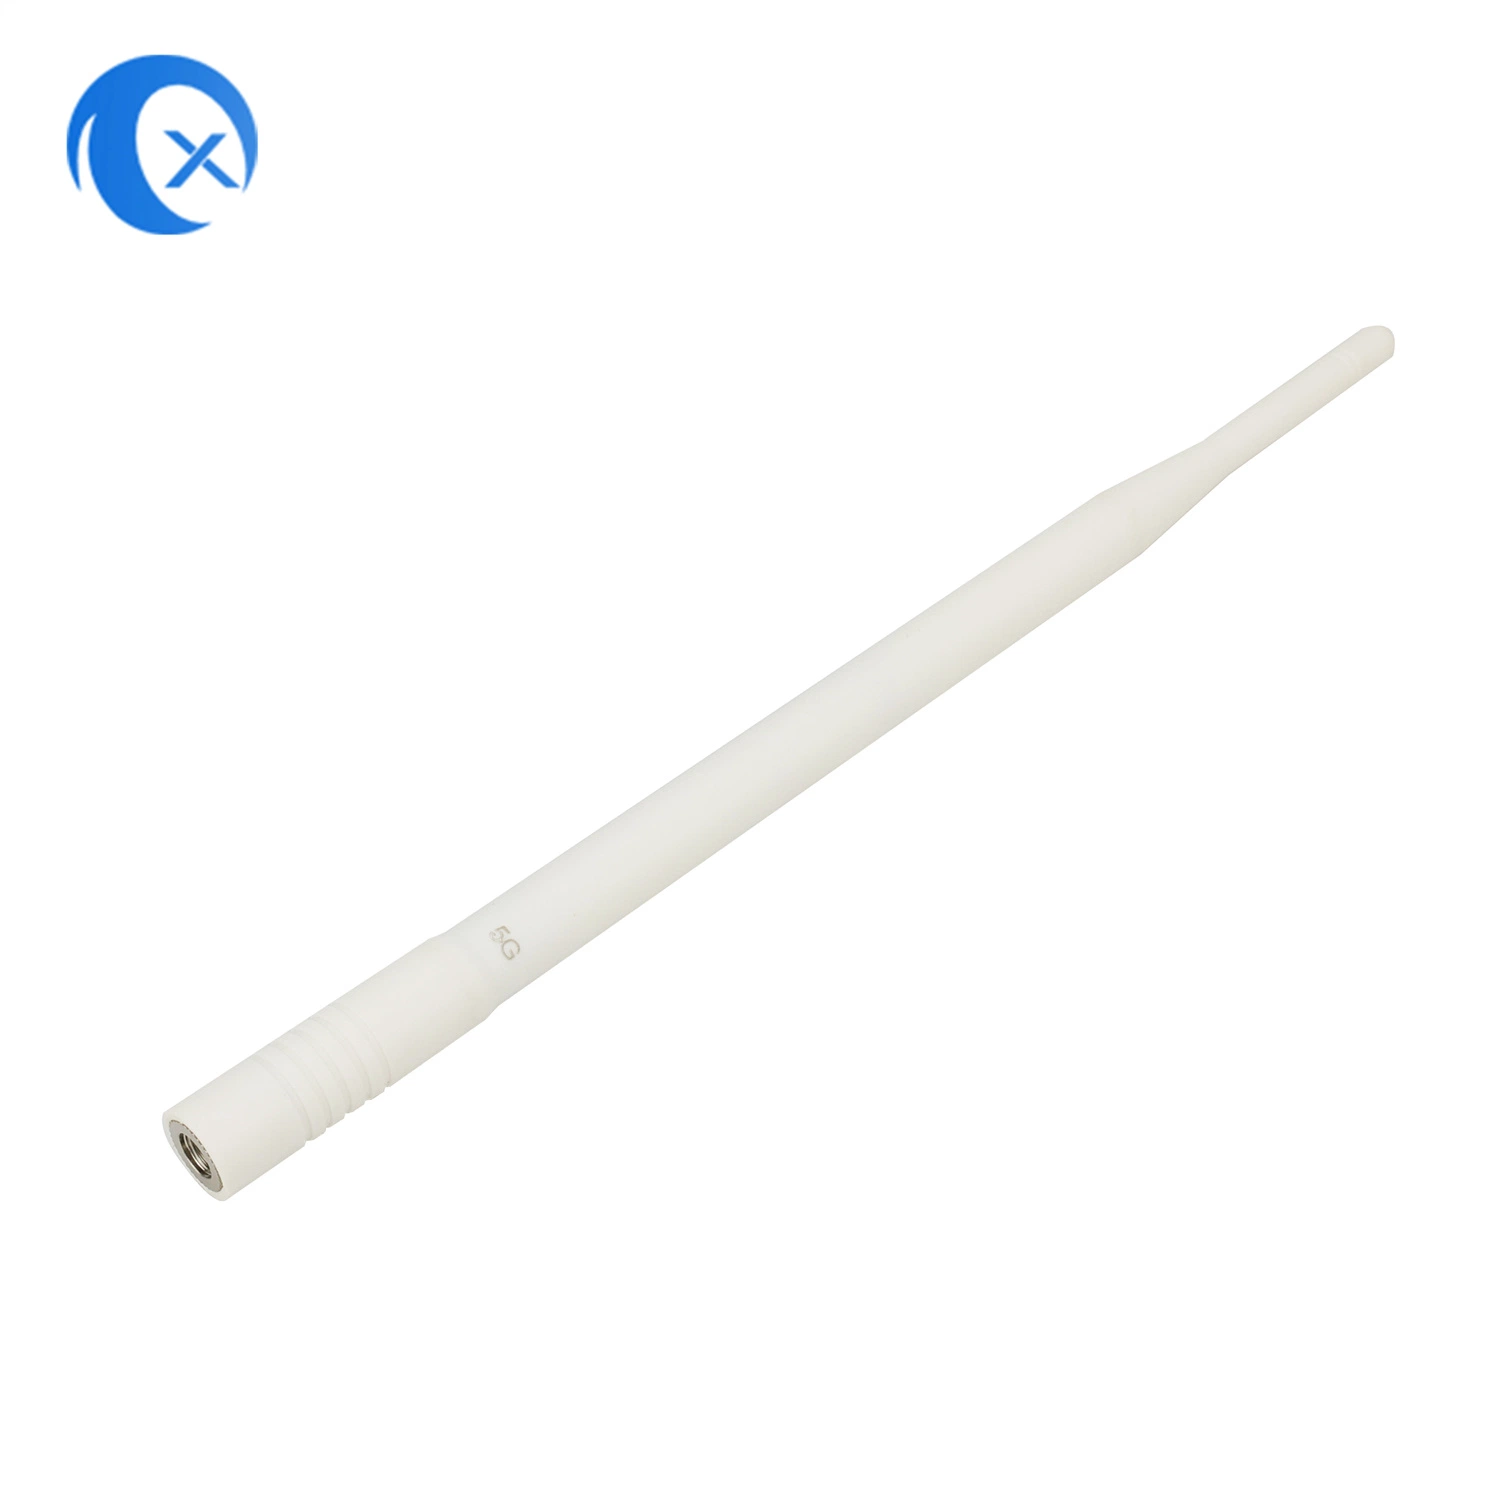 2.4G External Rubber Duck 7dBi High Gain Omni-Directional Router Ap WiFi Antenna with Hinged SMA RP Male Connector